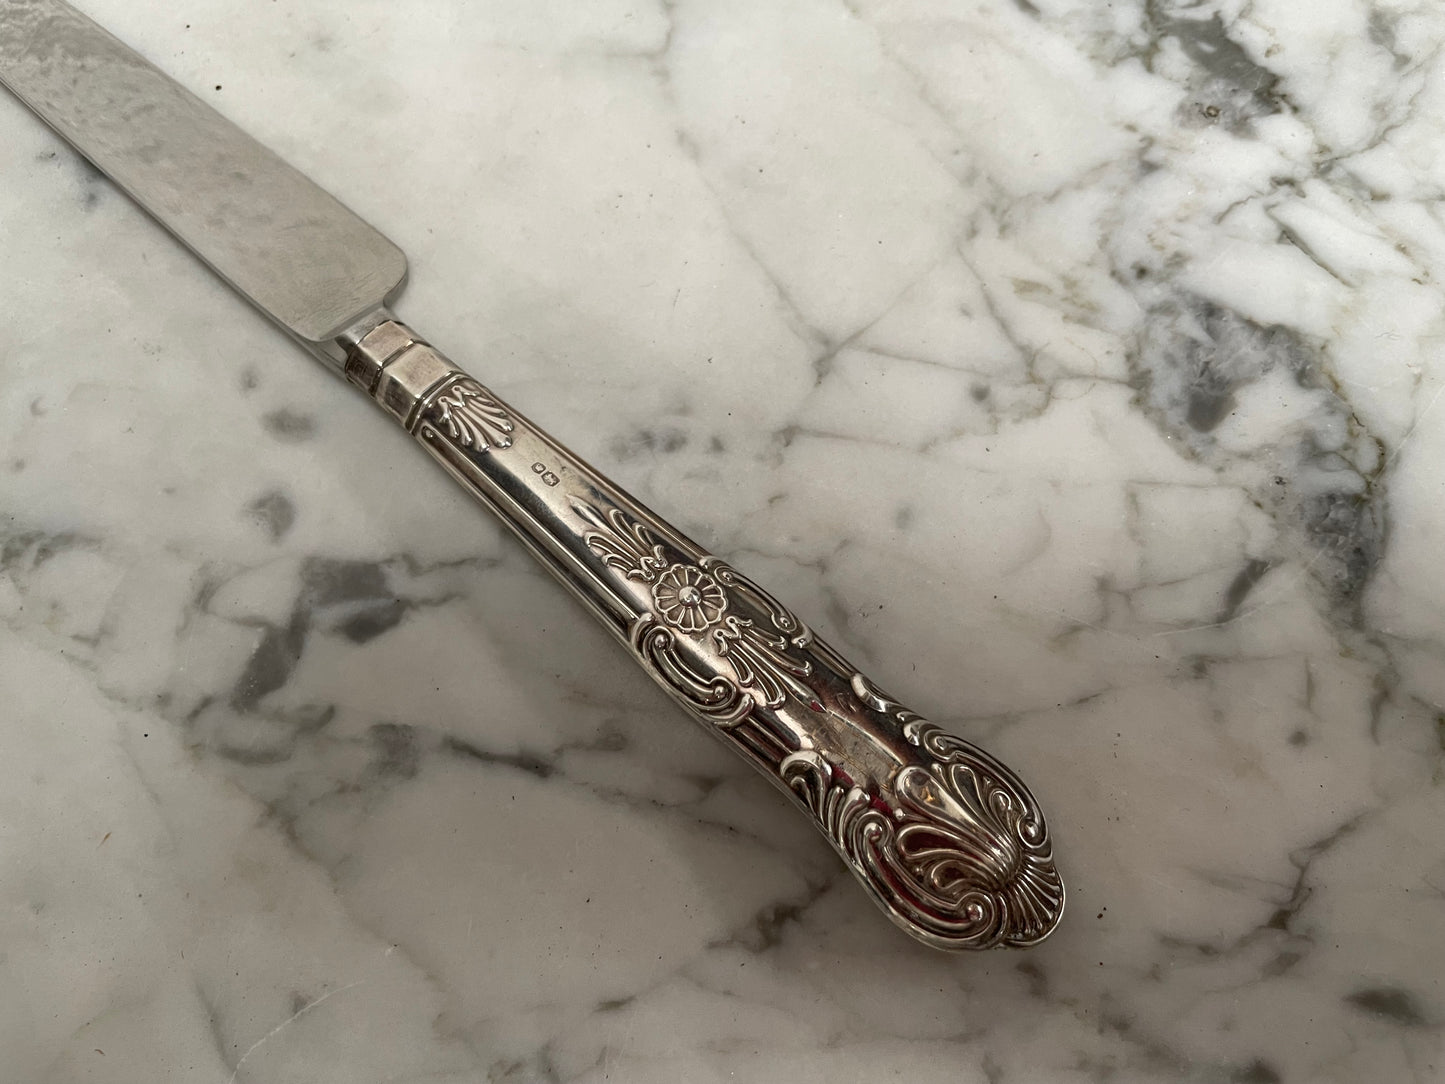 Decorative Sheffield sterling silver cheese knife. The handle has sterling silver hallmarks and the blade is stainless steel. Made in England and is in good original condition. 